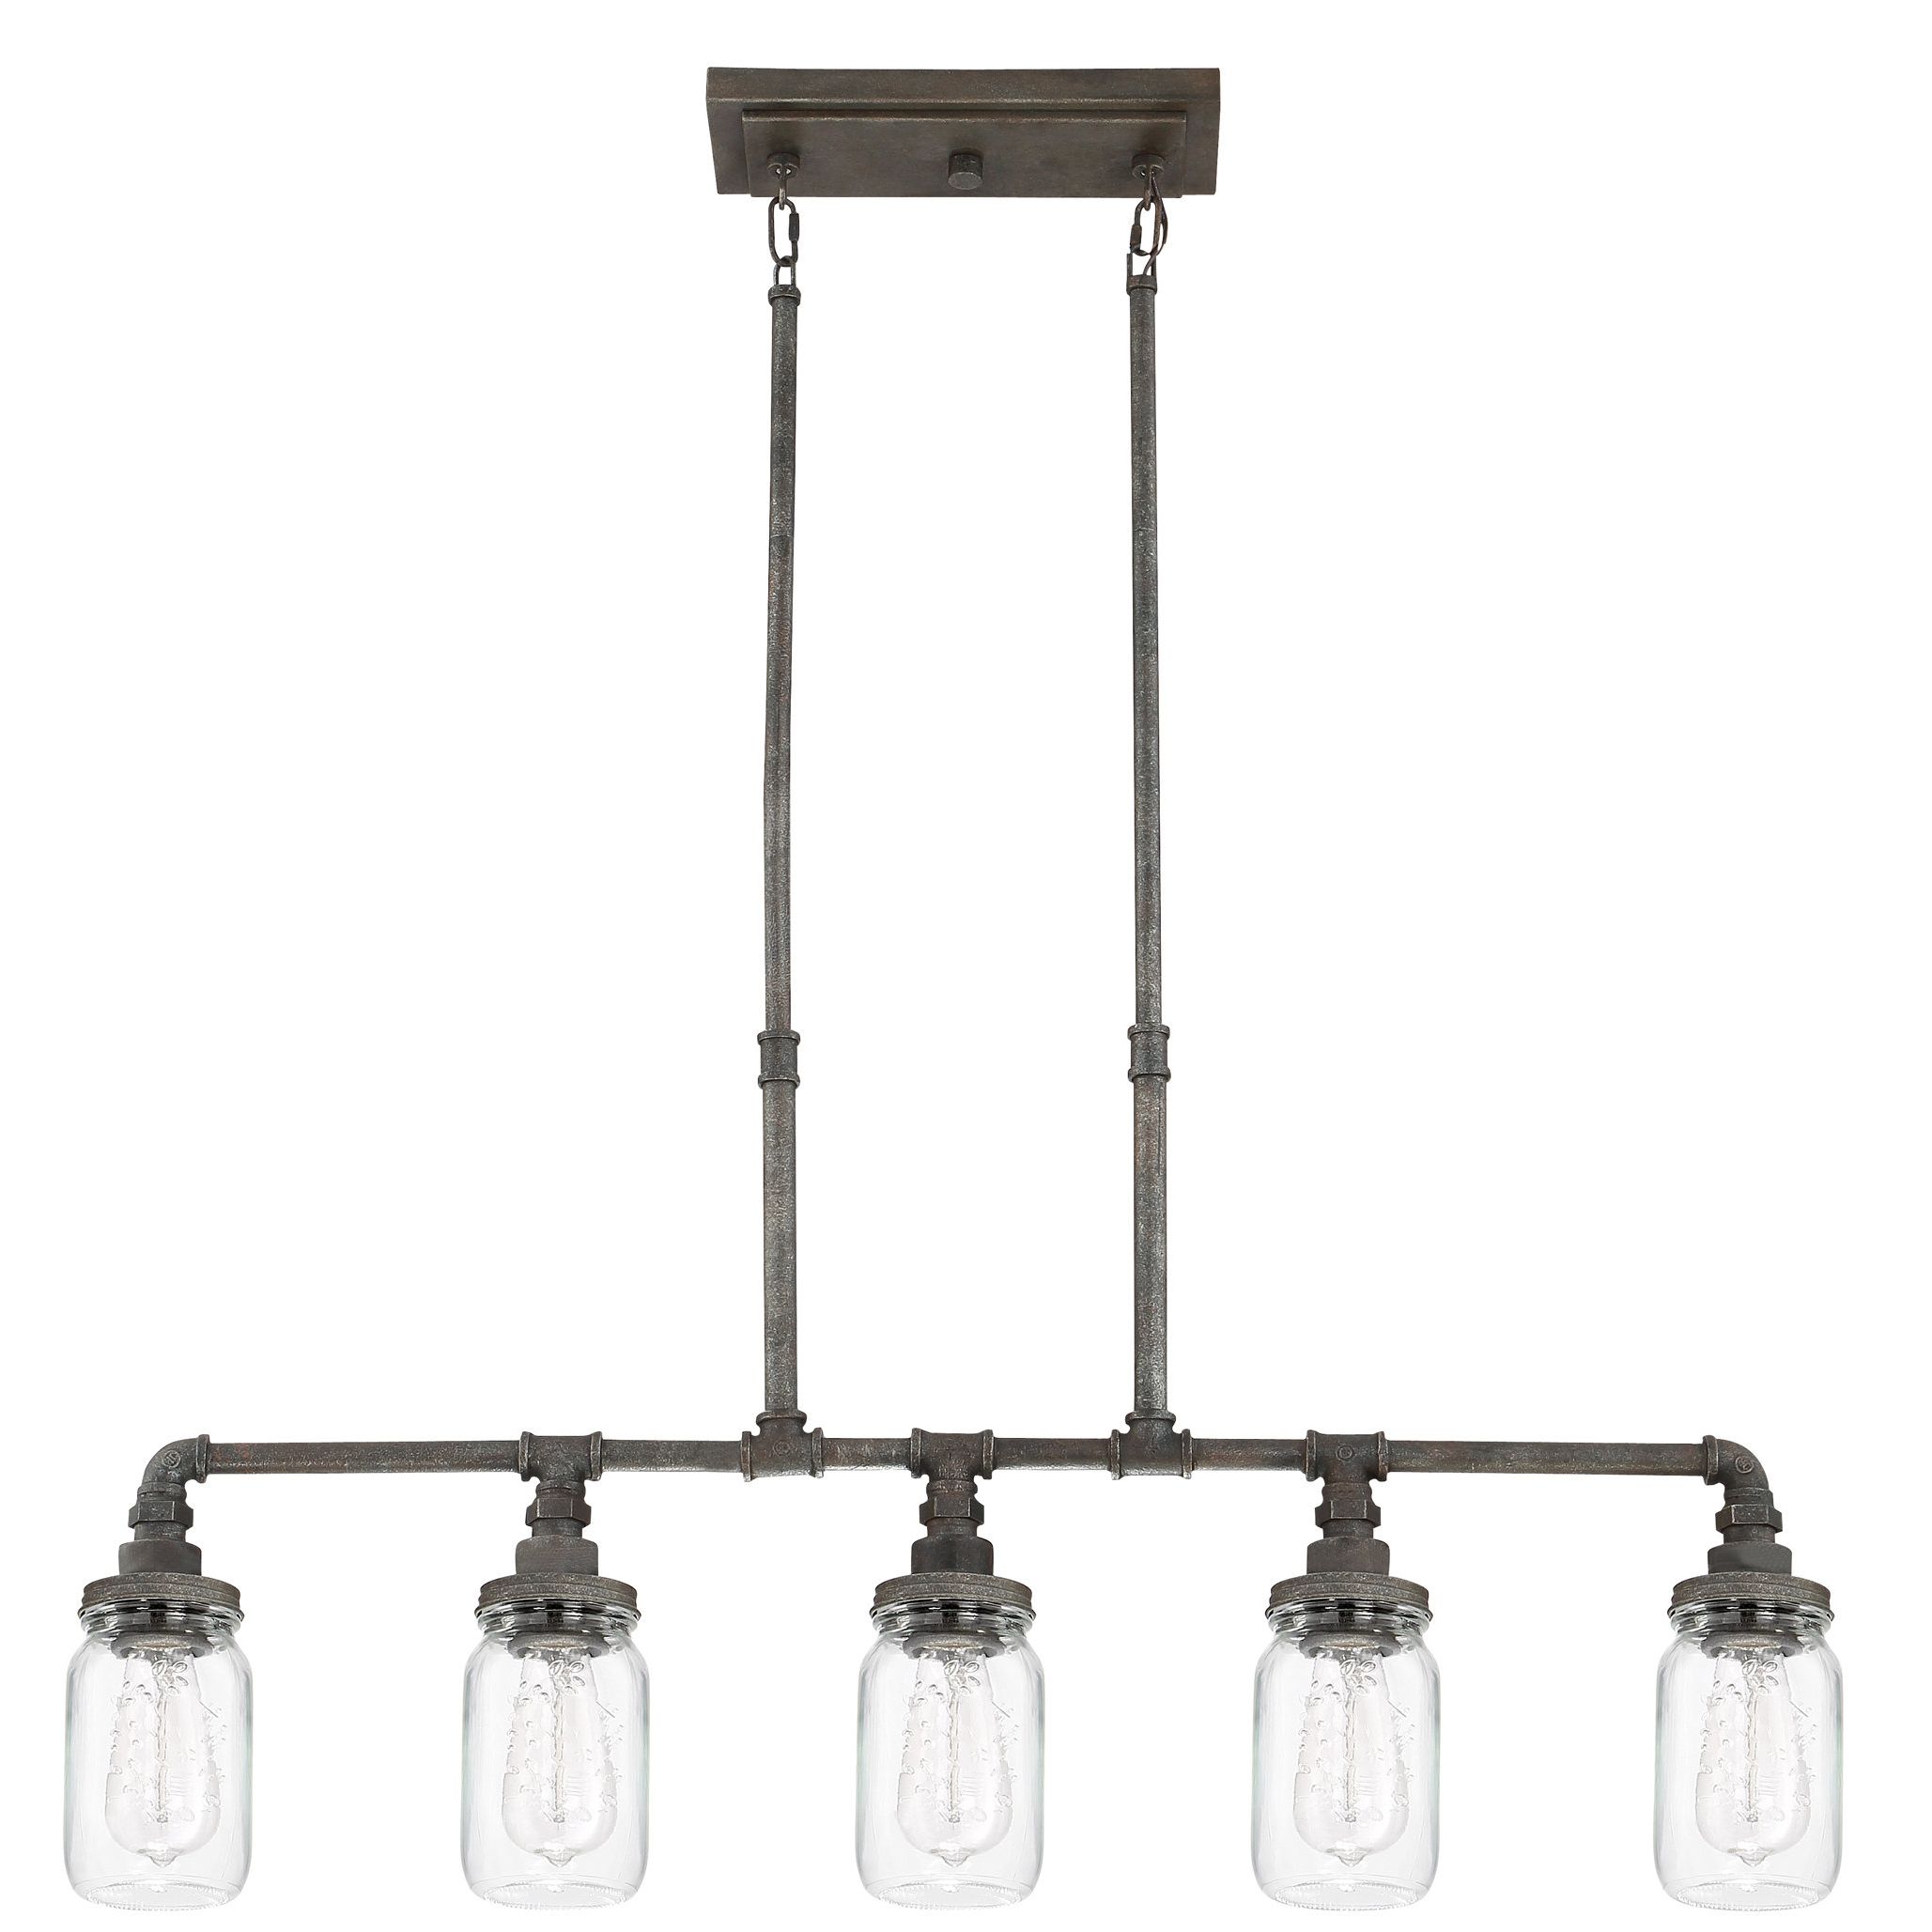 Bautista 6 Light Kitchen Island Bulb Pendants With Widely Used Brys Rustic Black 5 Light Kitchen Island Pendant (View 9 of 25)